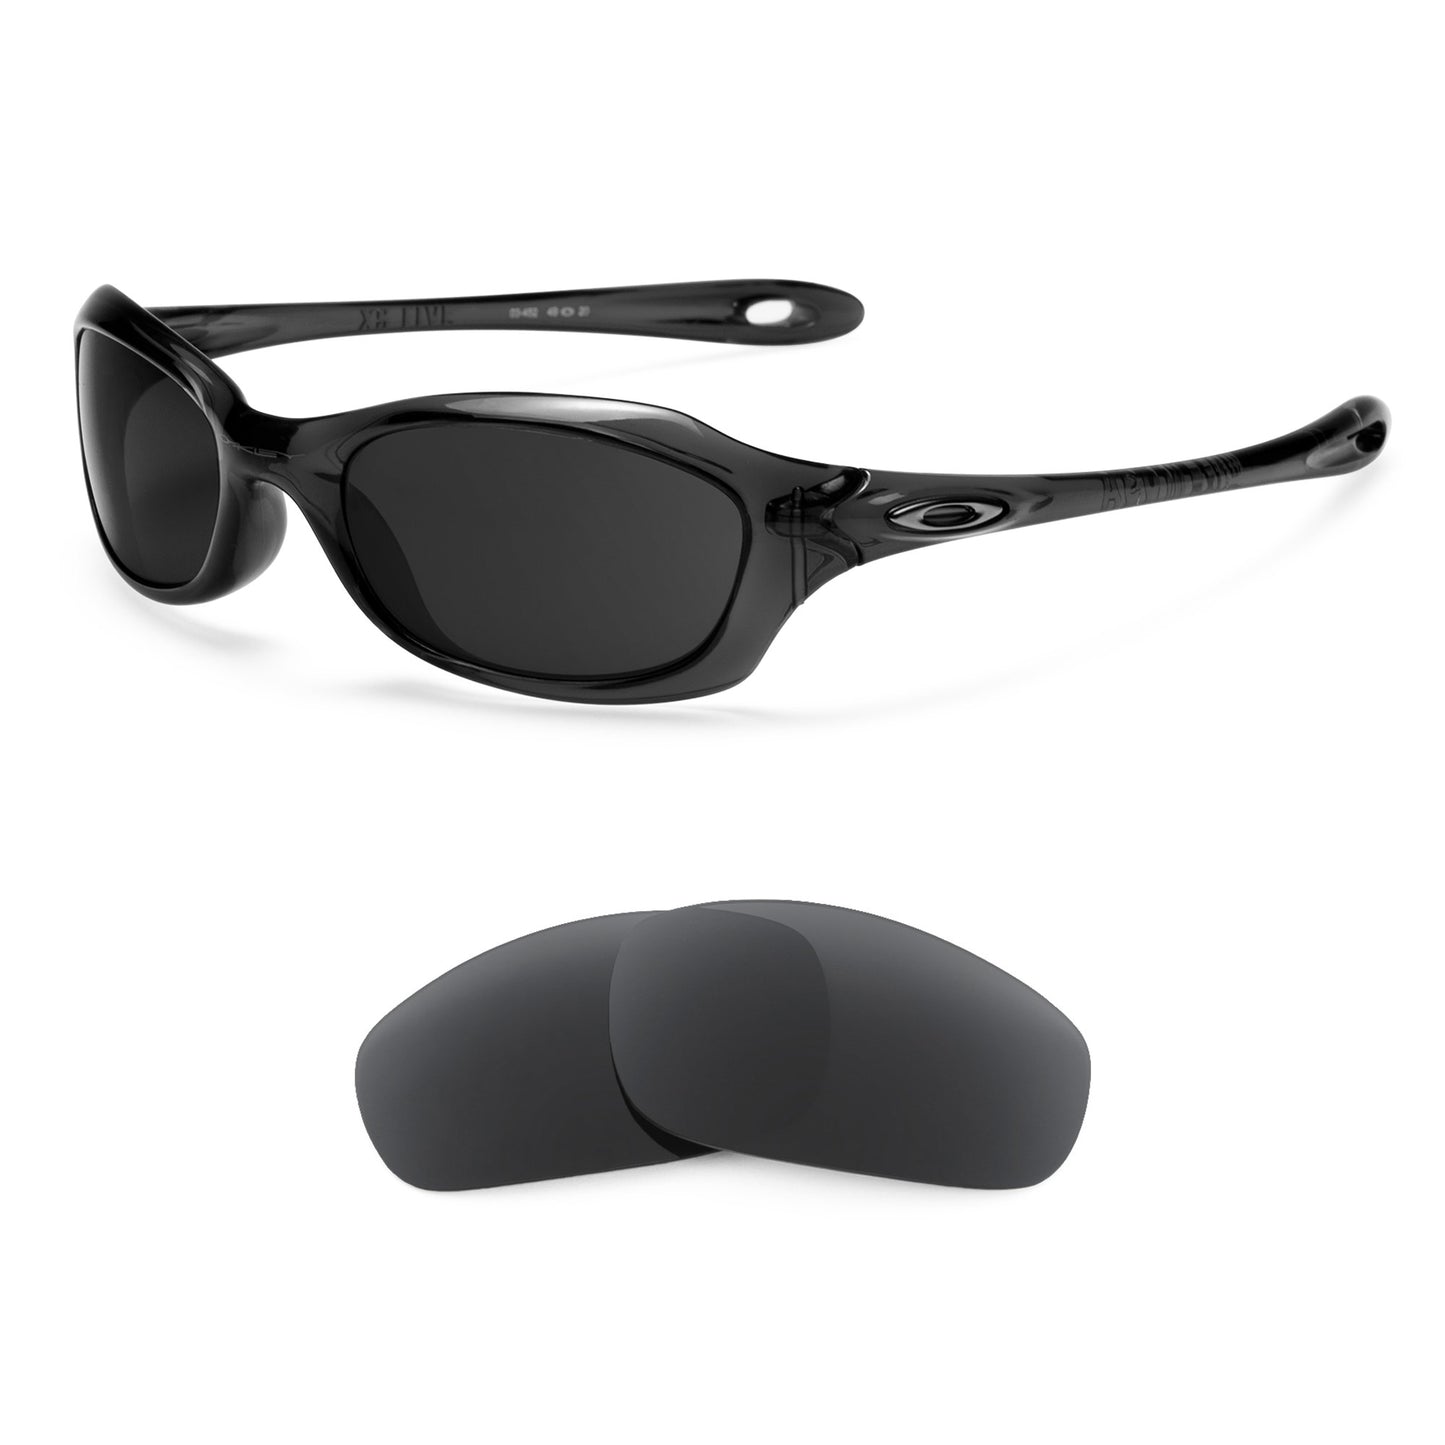 Oakley XS Fives sunglasses with replacement lenses